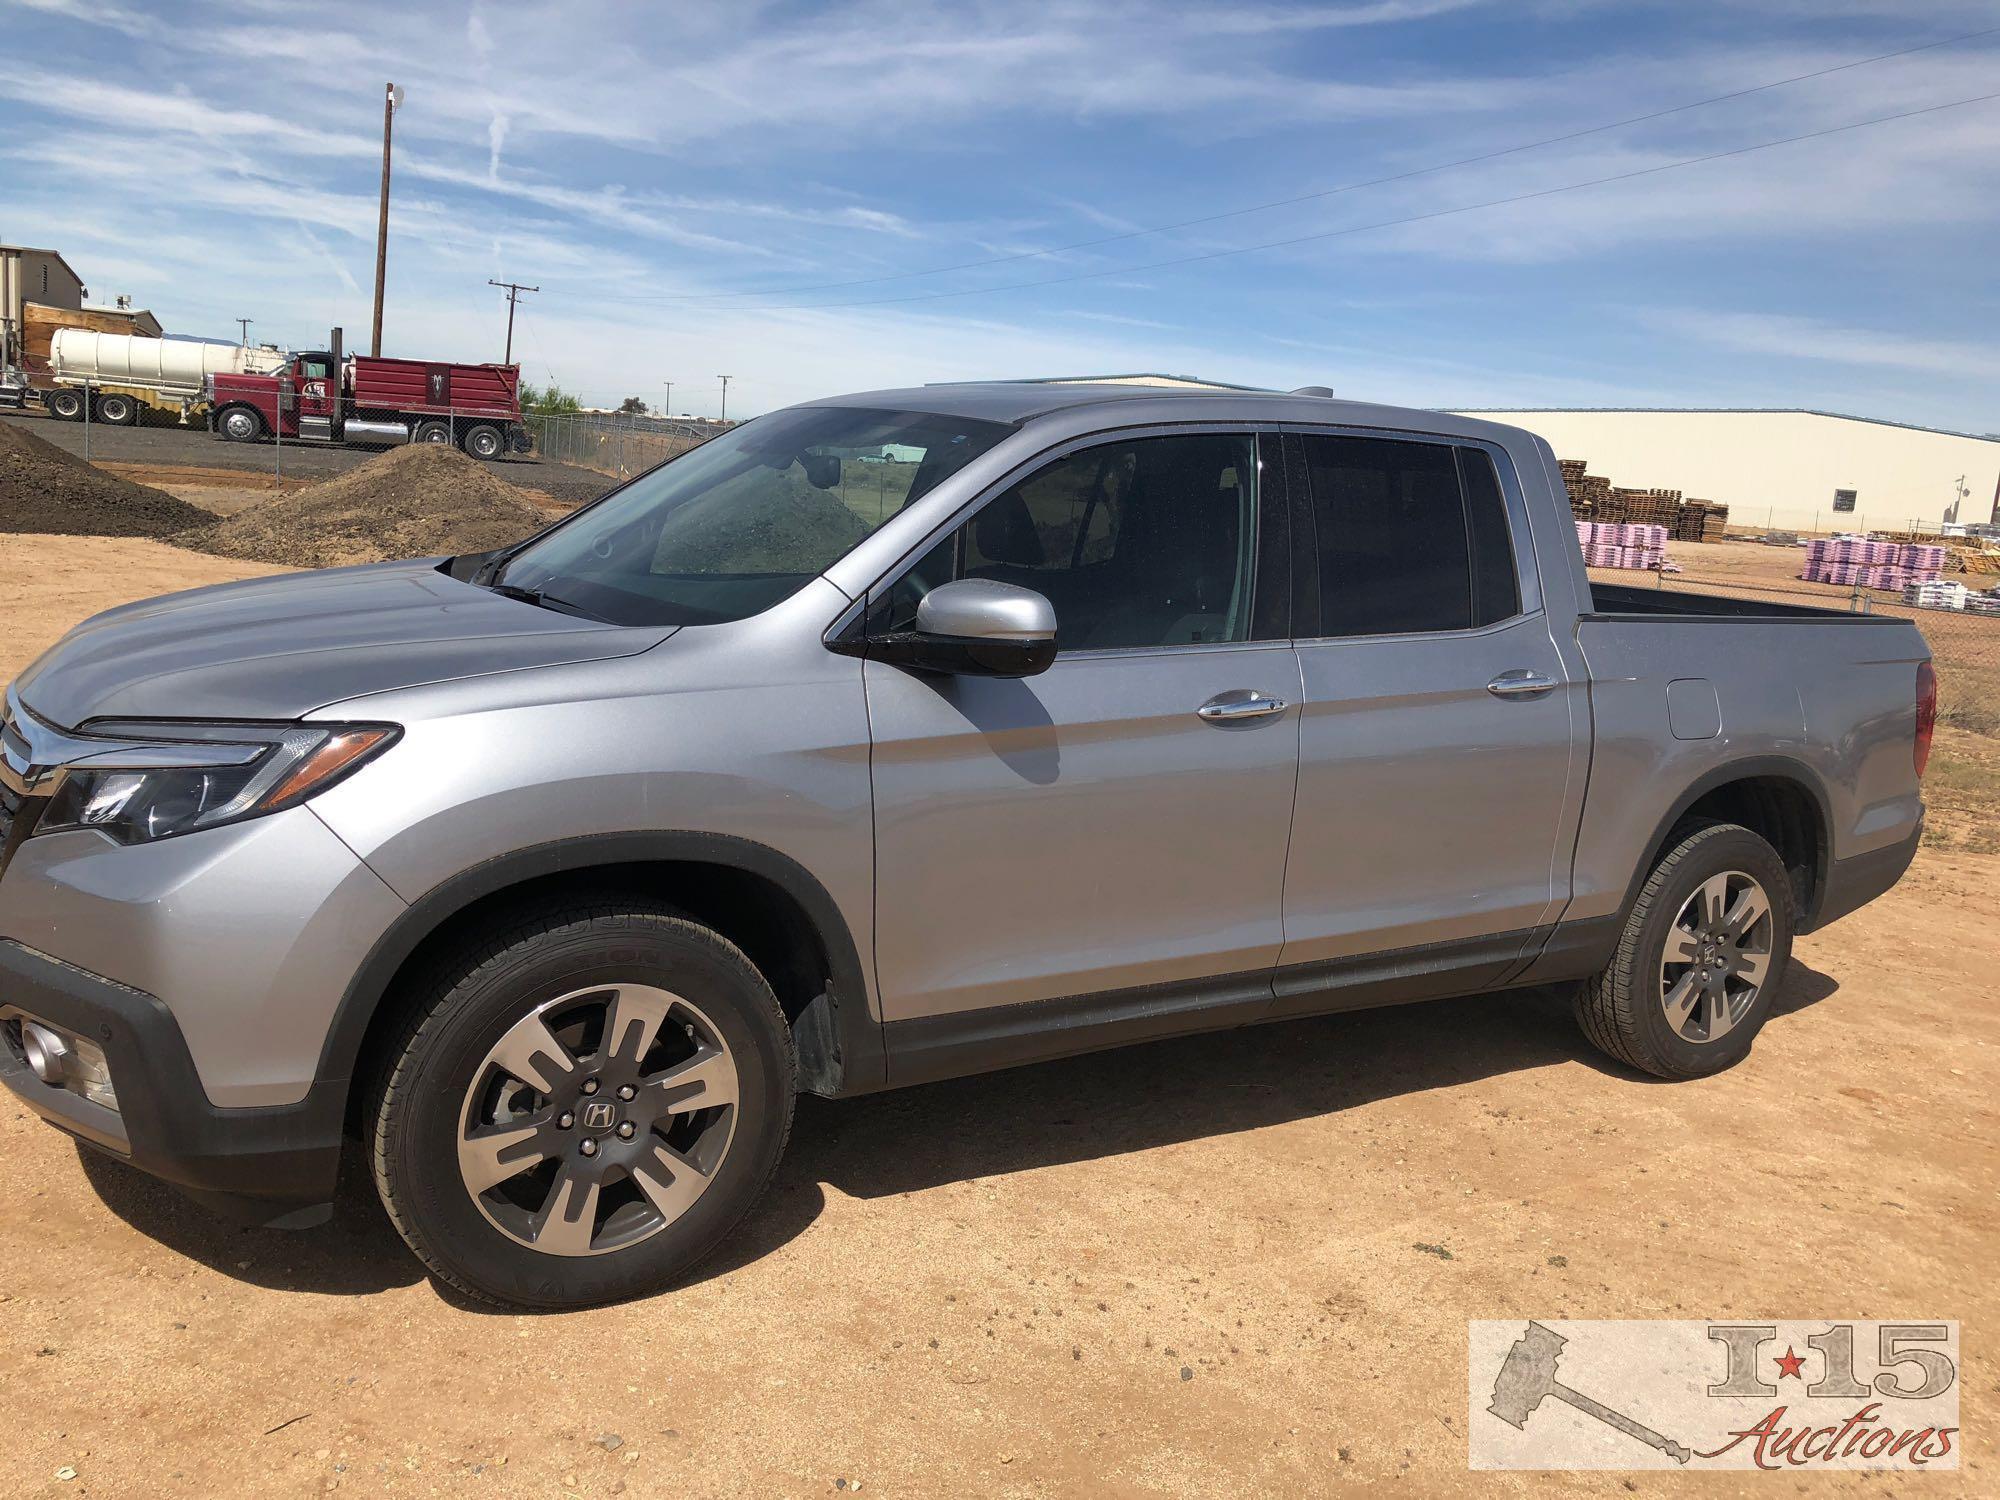 2017 Honda Ridgeline AWD Silver, 1 Owner Truck!! ONLY 11,XXX MILES!!! CLEAN AUTO REPORT!!!